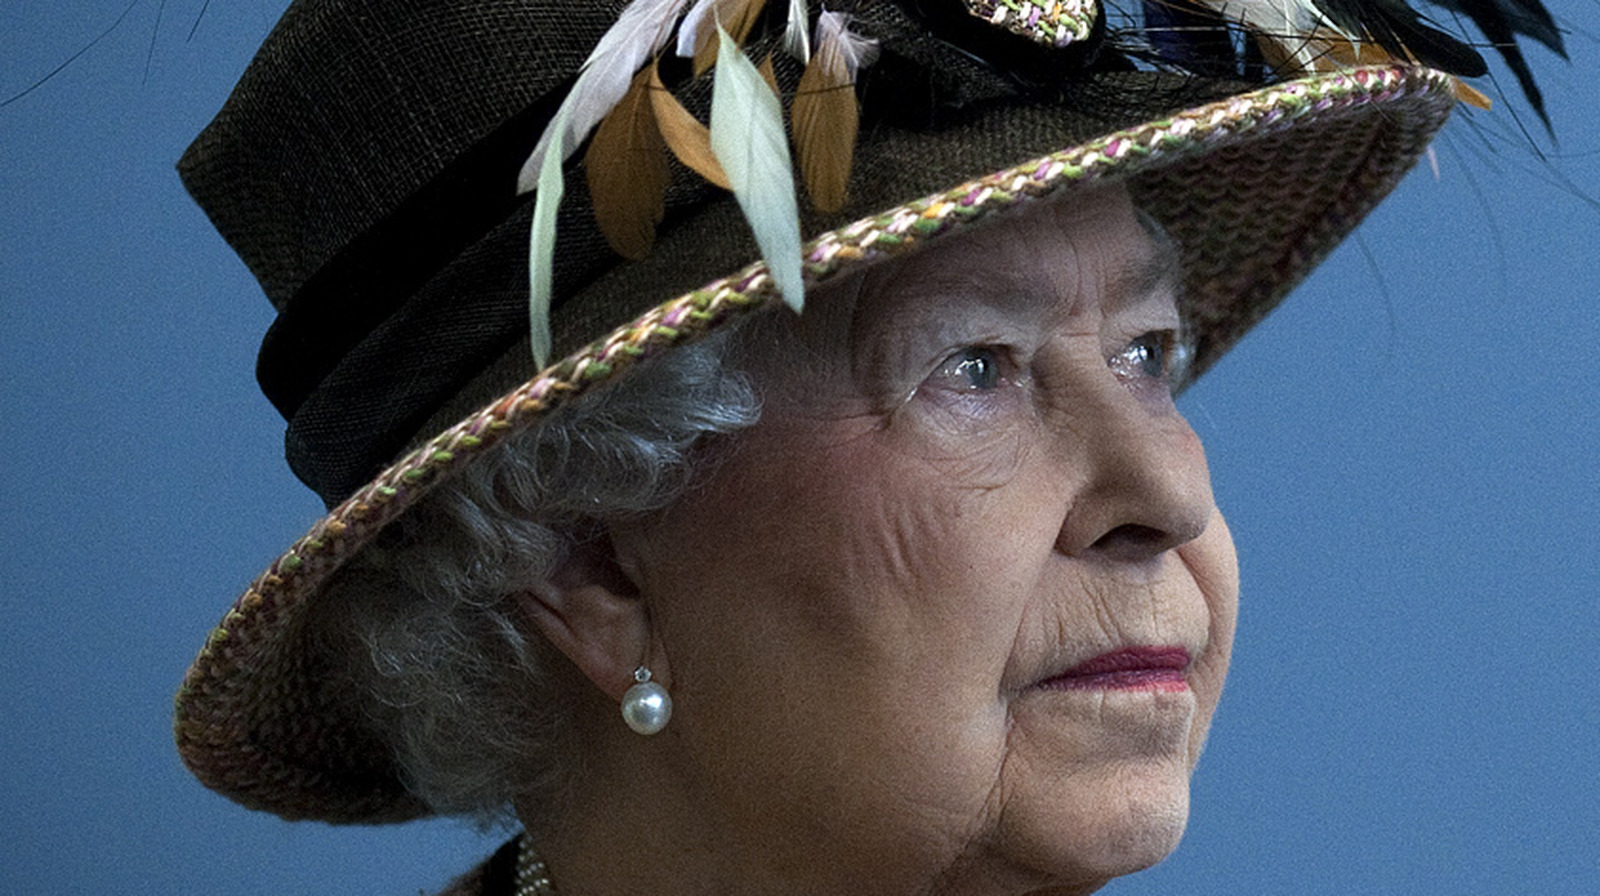 London Will Experience Unprecedented Travel Prior To The Queen's Funeral